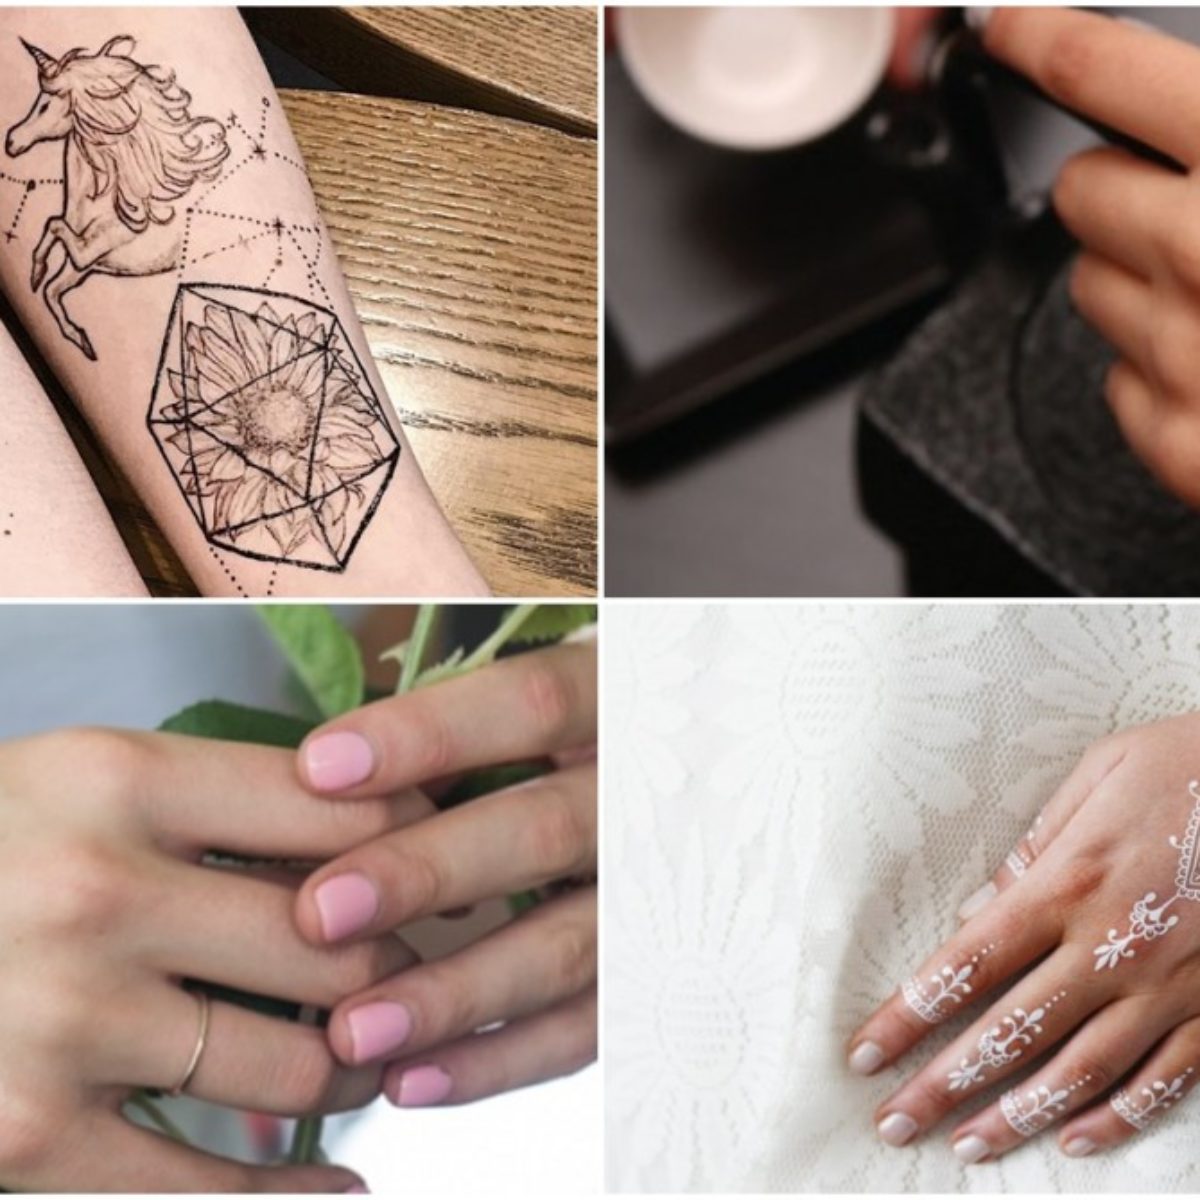 How To Make Permanent Tattoo At Home Without Needle